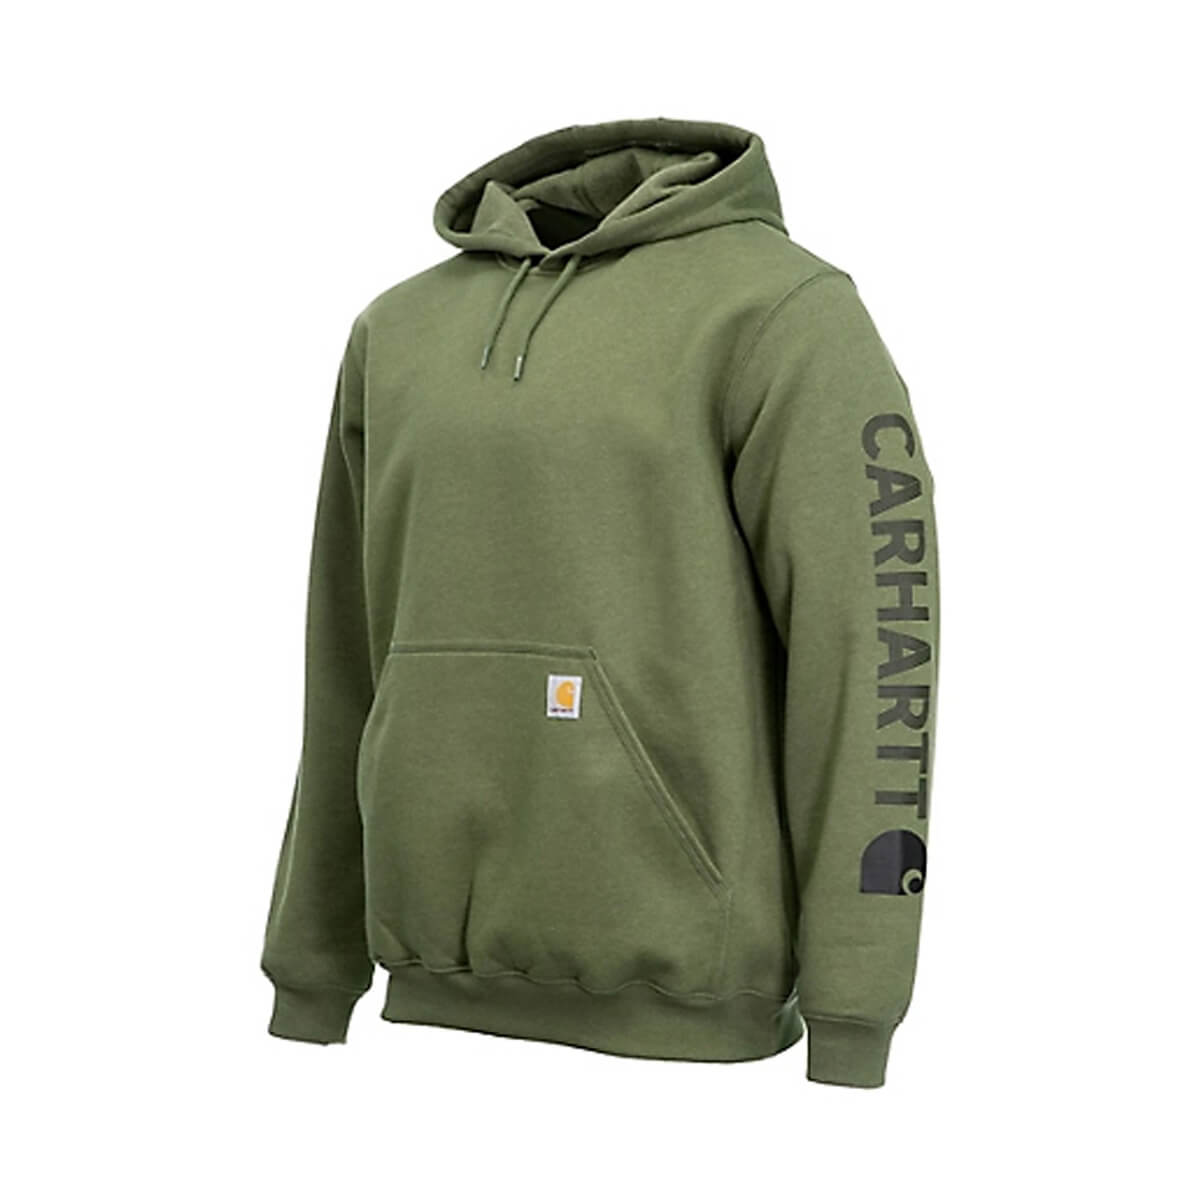 Carhartt Loose Fit Midweight Logo Graphic Sweatshirt - Chive Heather